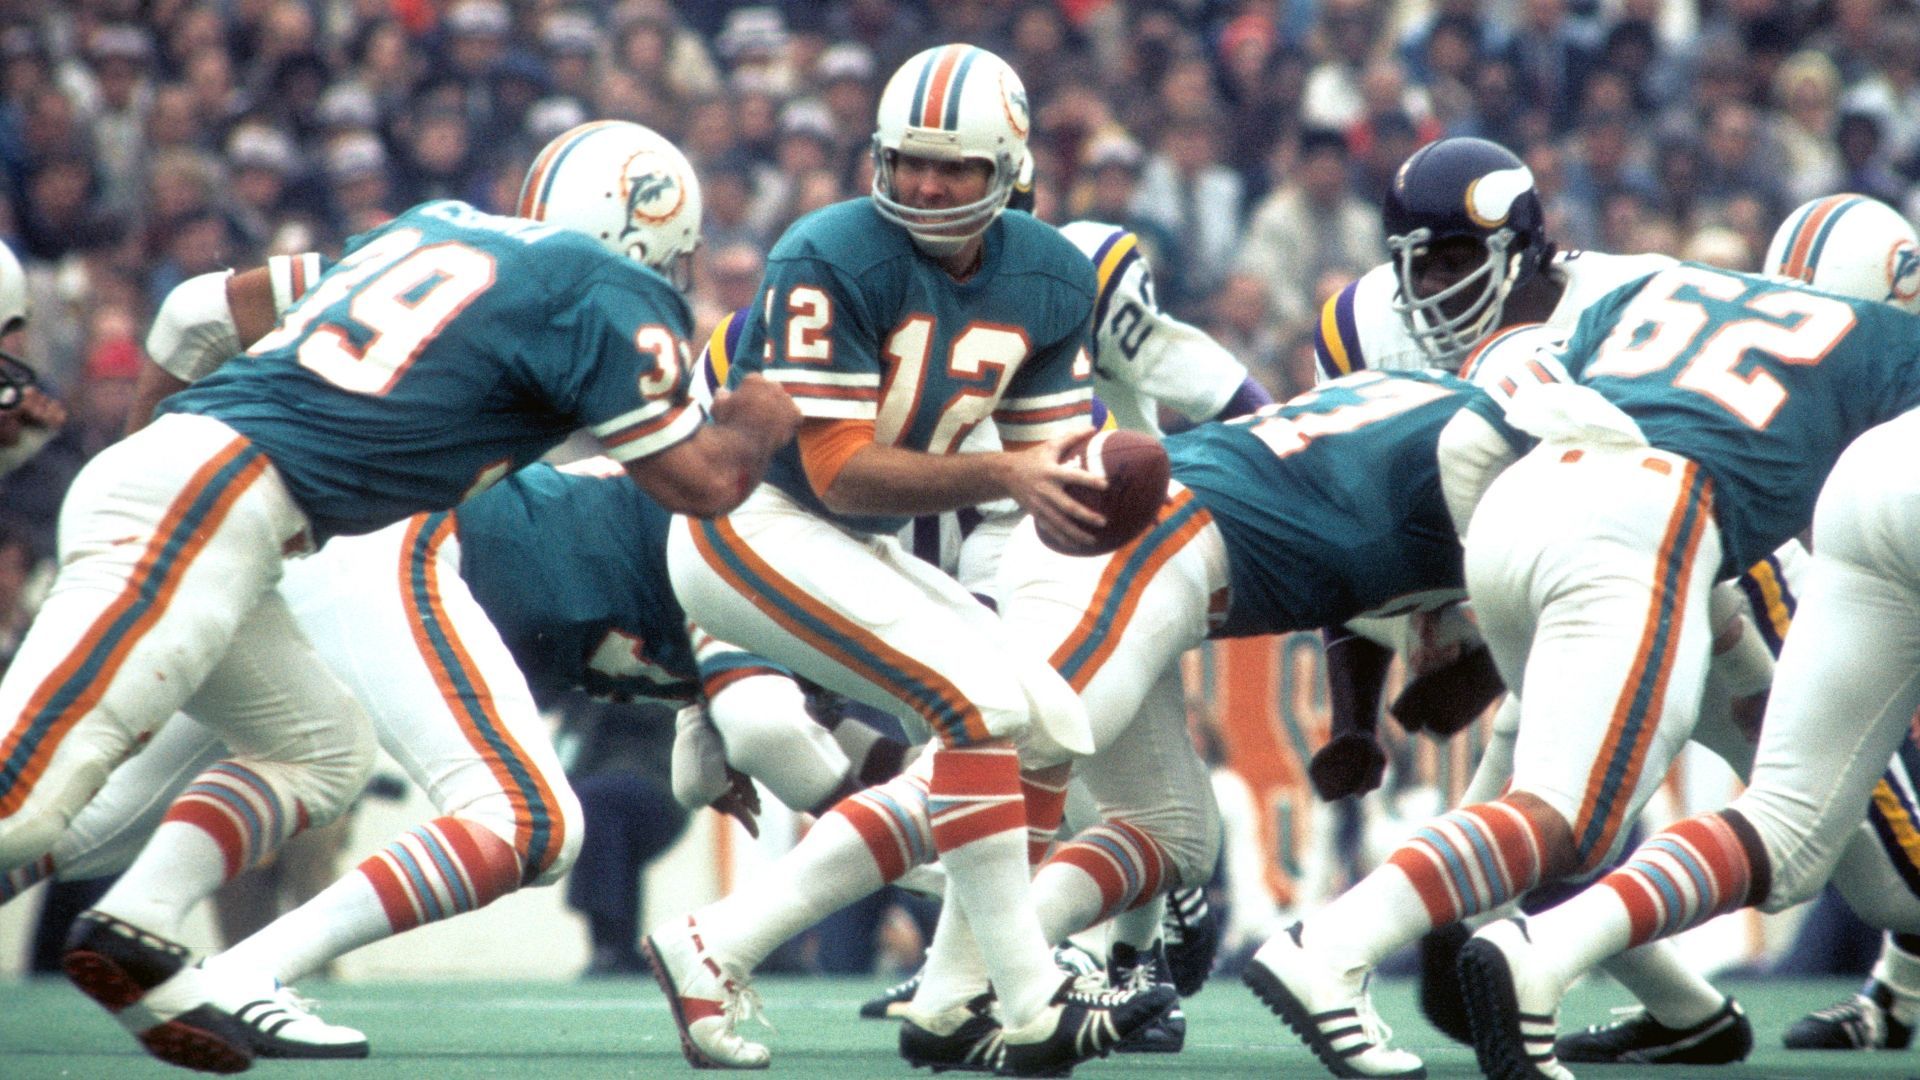 <strong>1974 - Miami Dolphins</strong><br>Endstand: 24:7 gegen die Minnesota Vikings<br>Coach: Don Shula<br>MVP: Larry Csonka